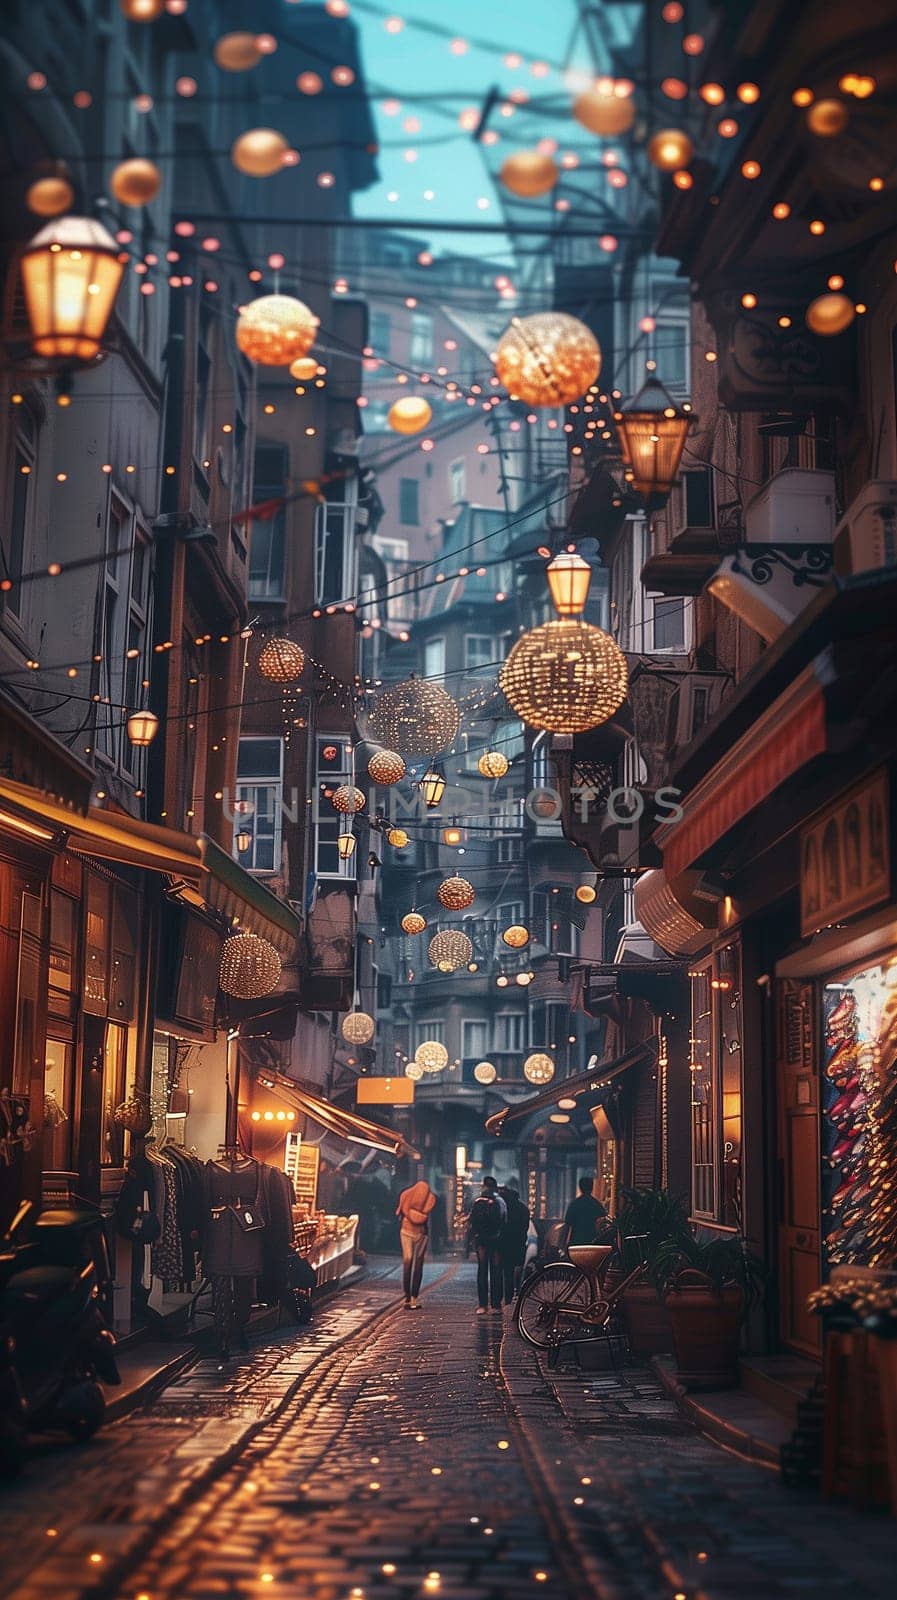 Daylight and lanterns of a very realistic streetscape. High quality photo